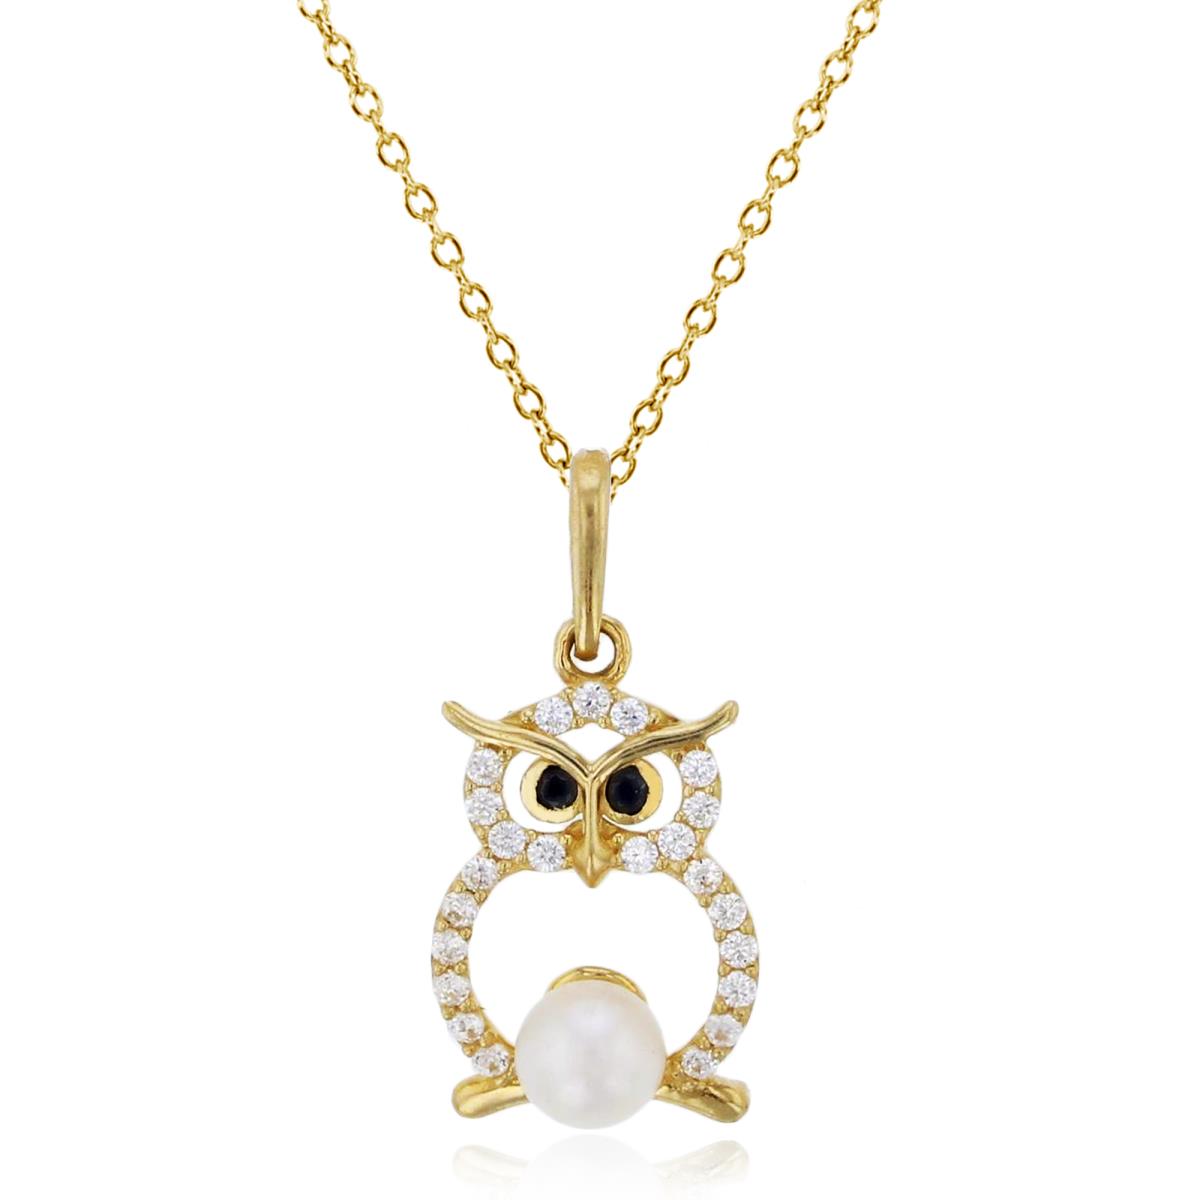 10K Yellow Gold Rnd Black /White CZ & 8mm Fresh Water Pearl Owl 18"Necklace